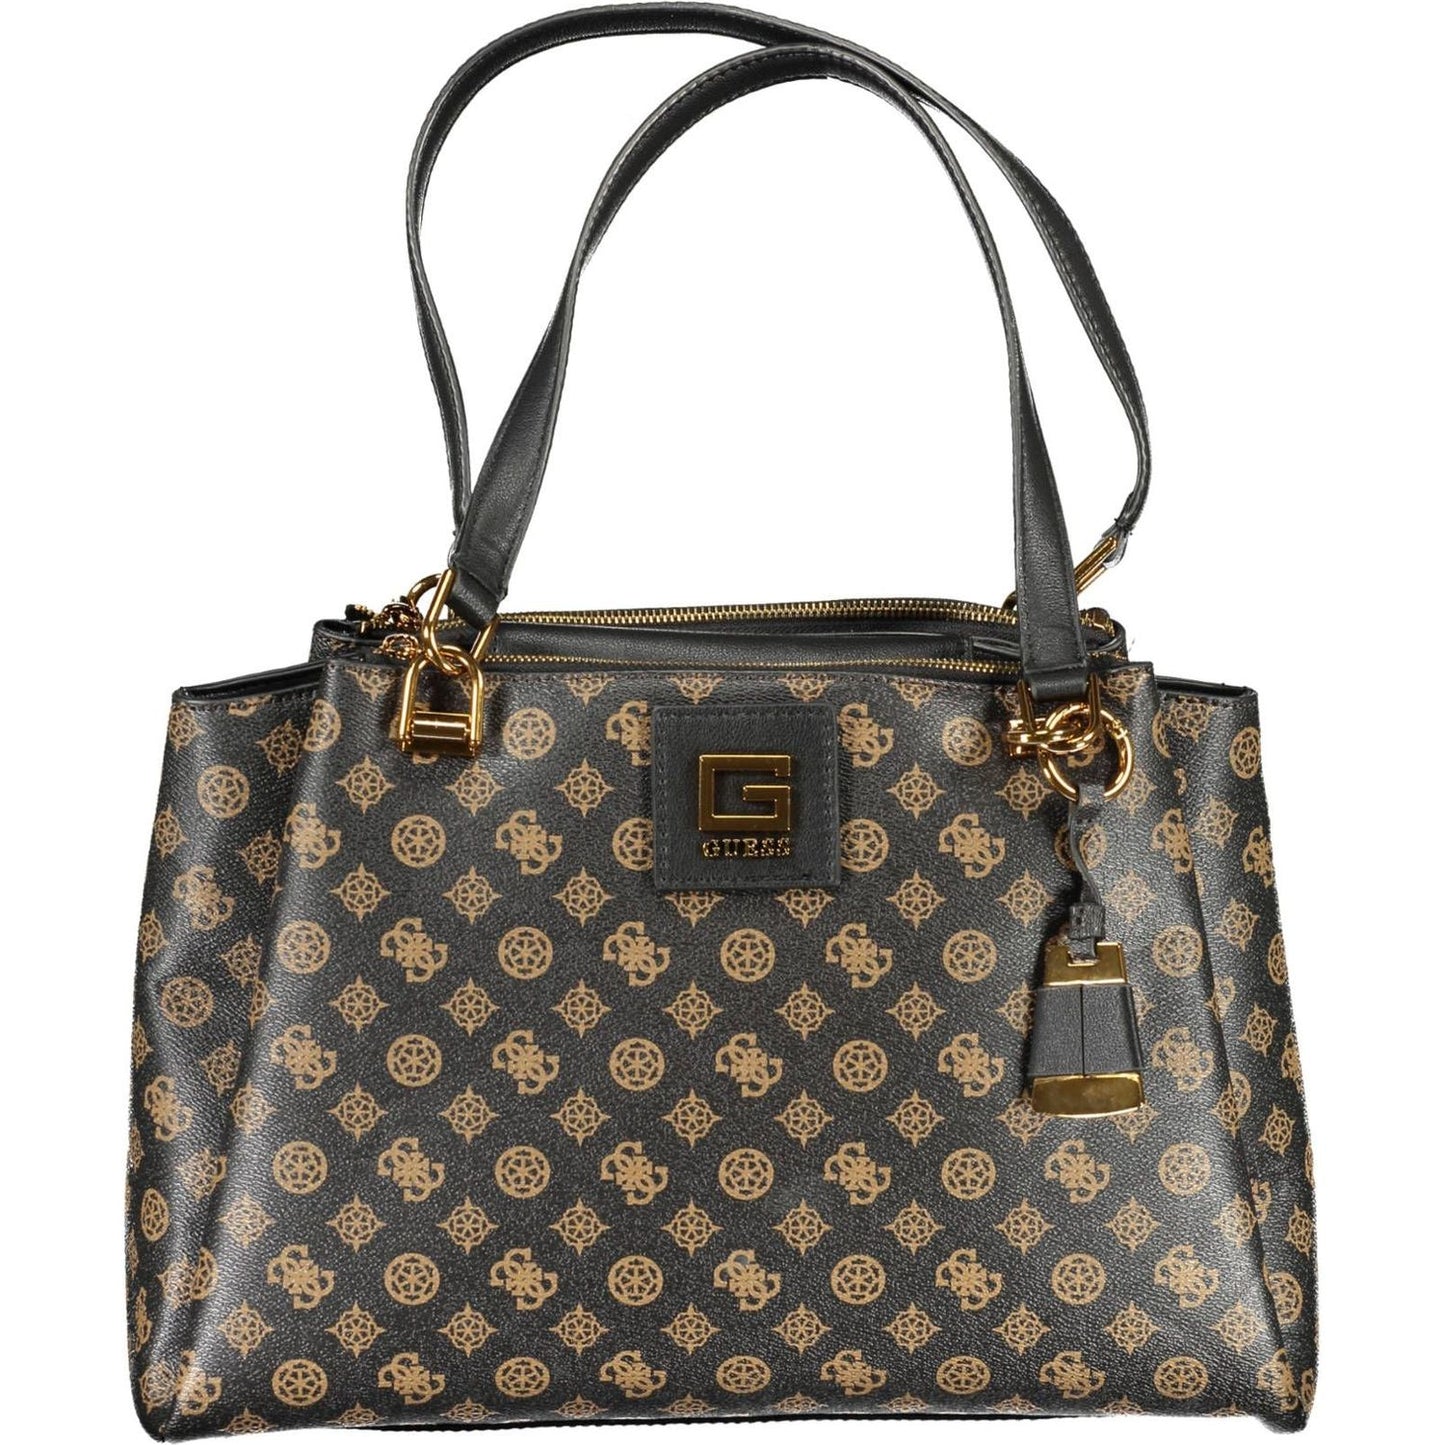 Guess Jeans Chic Brown Polyurethane Shoulder Bag chic-brown-polyurethane-shoulder-bag-1